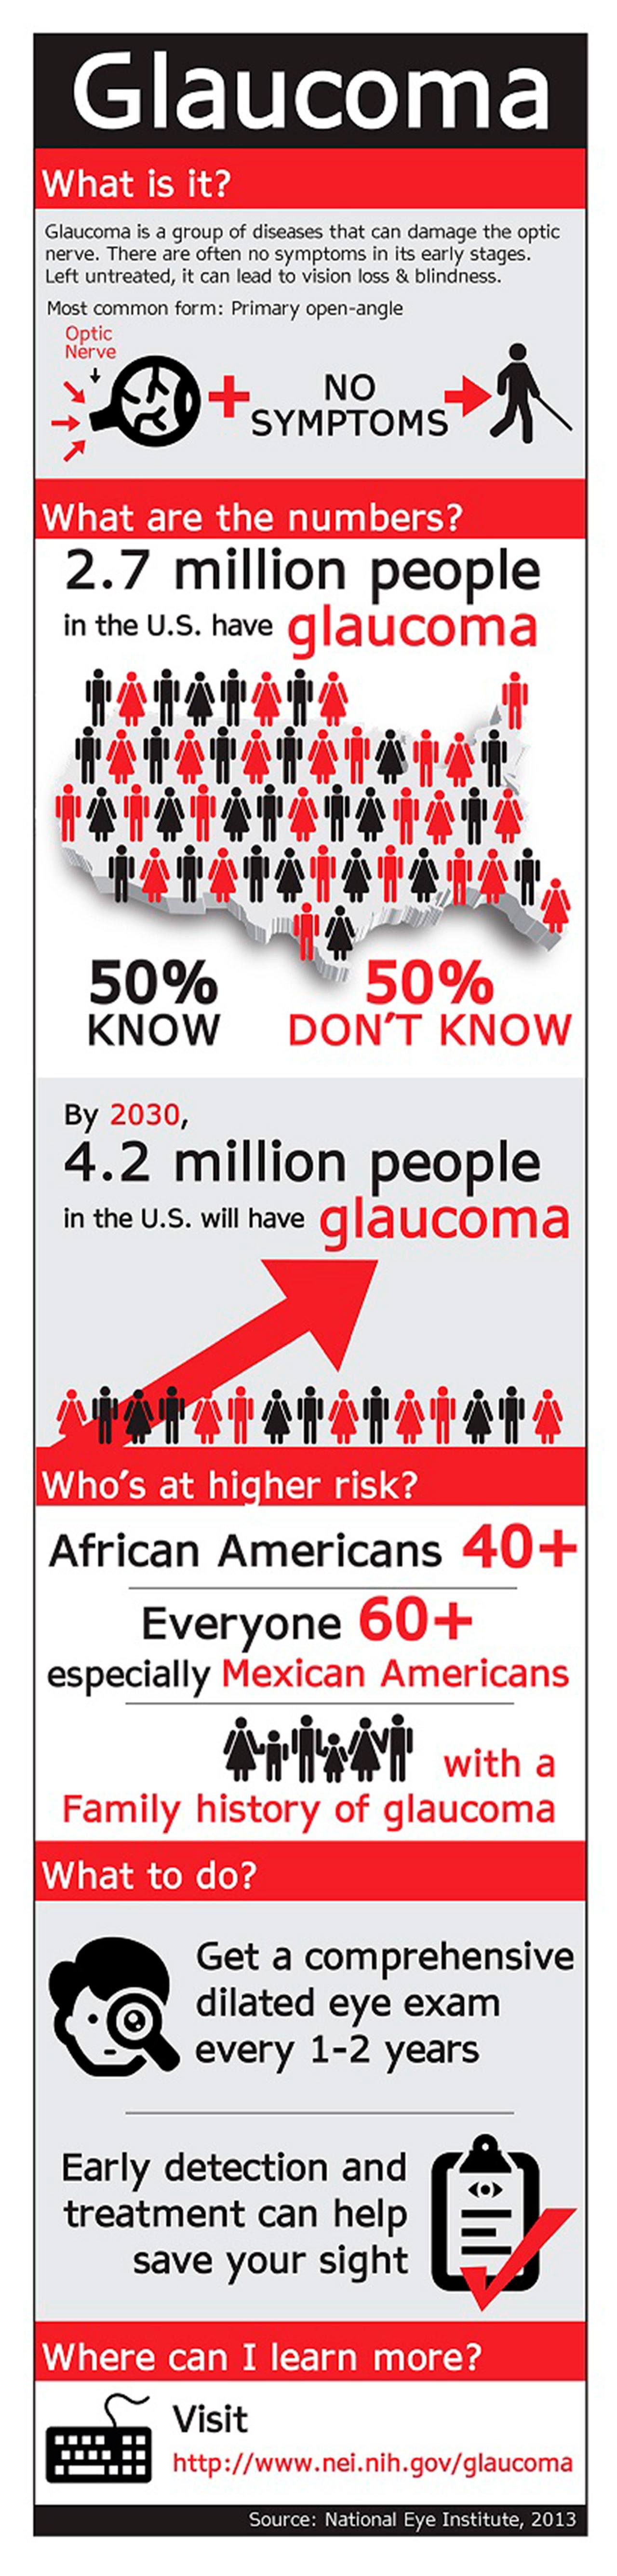 Make a resolution for healthier vision | Glaucoma Awareness Month